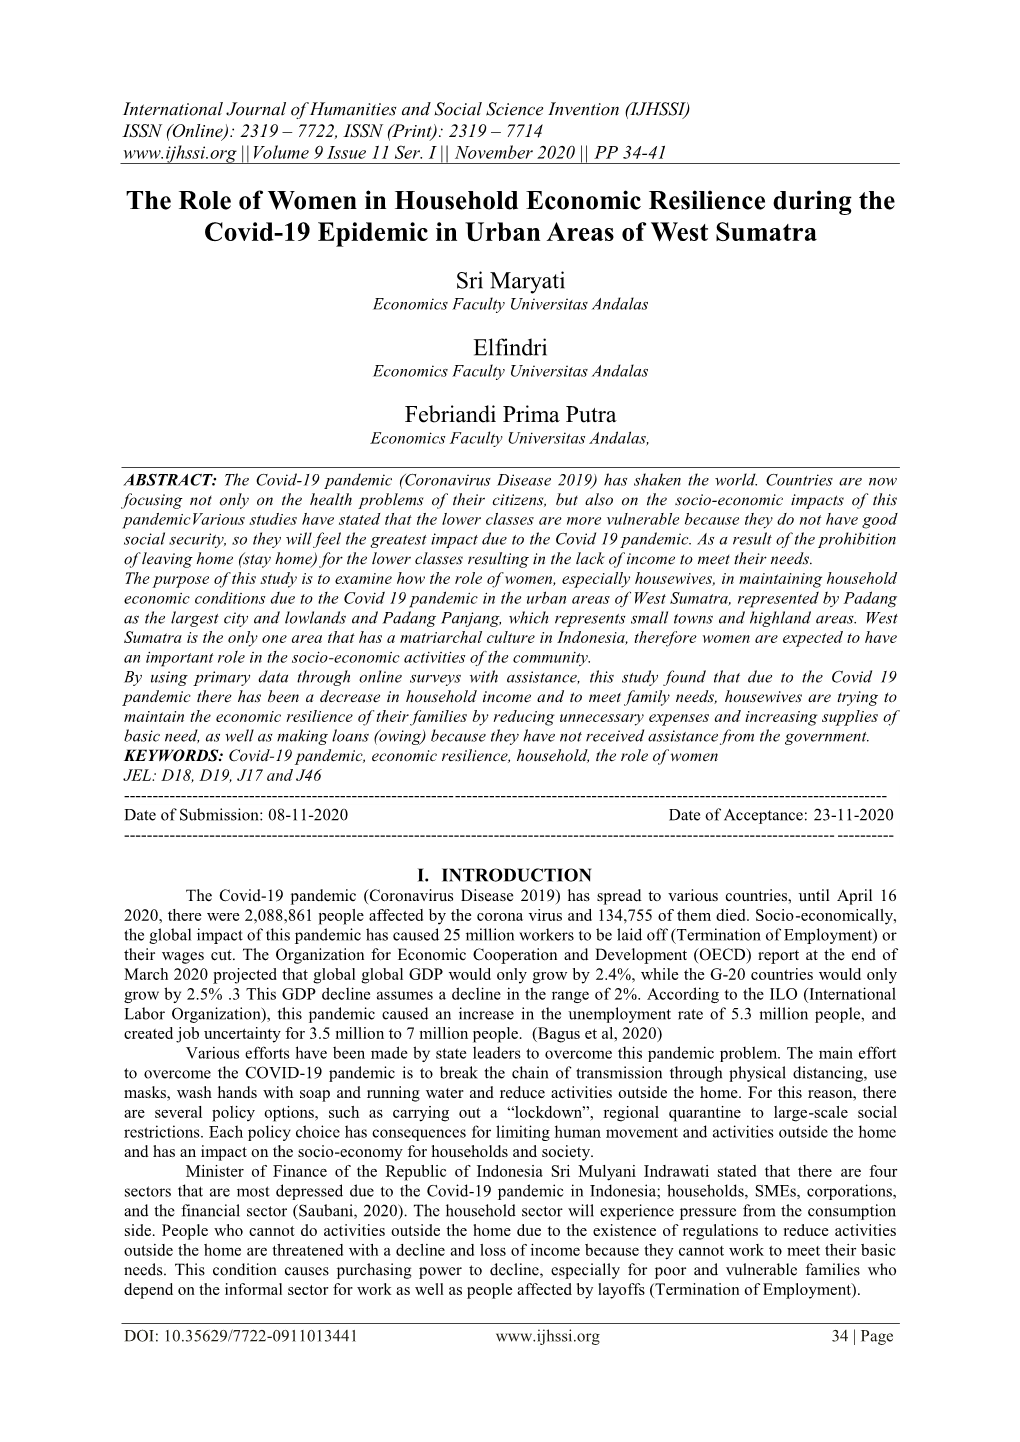 The Role of Women in Household Economic Resilience During the Covid-19 Epidemic in Urban Areas of West Sumatra